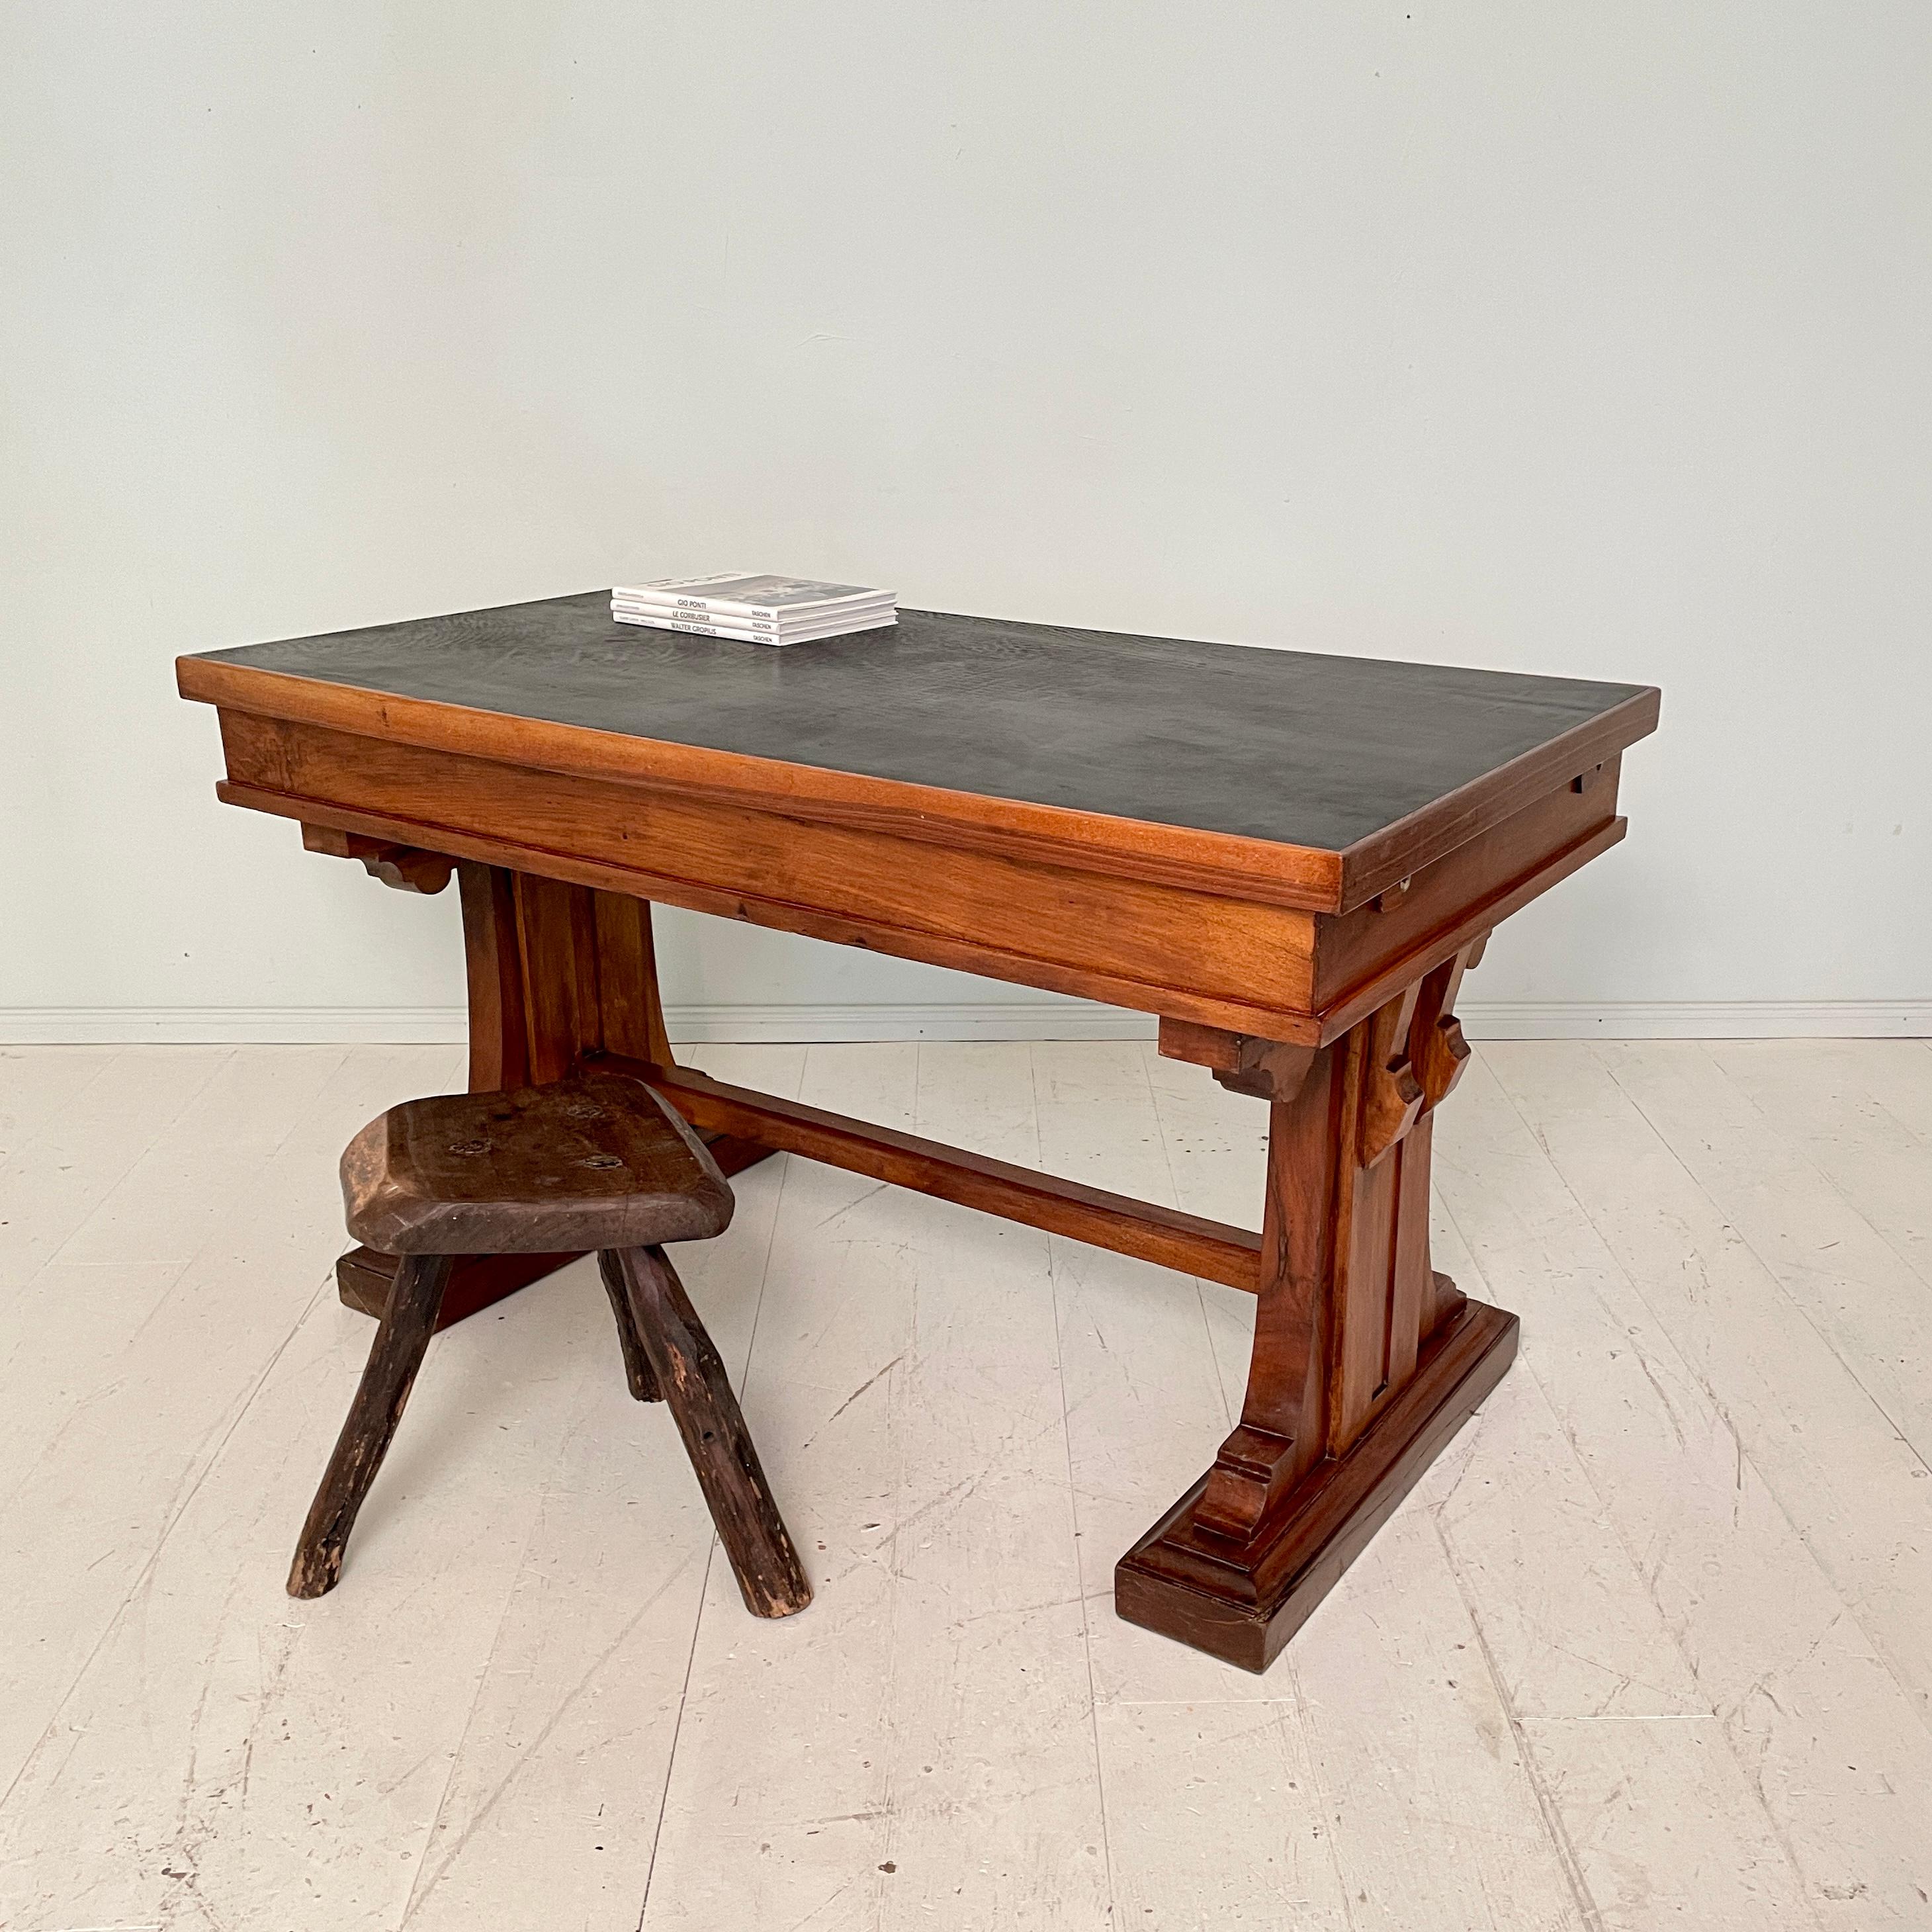 Italian Art Deco Desk or Writing Table in Walnut and Black Leather Top, 1920s 10